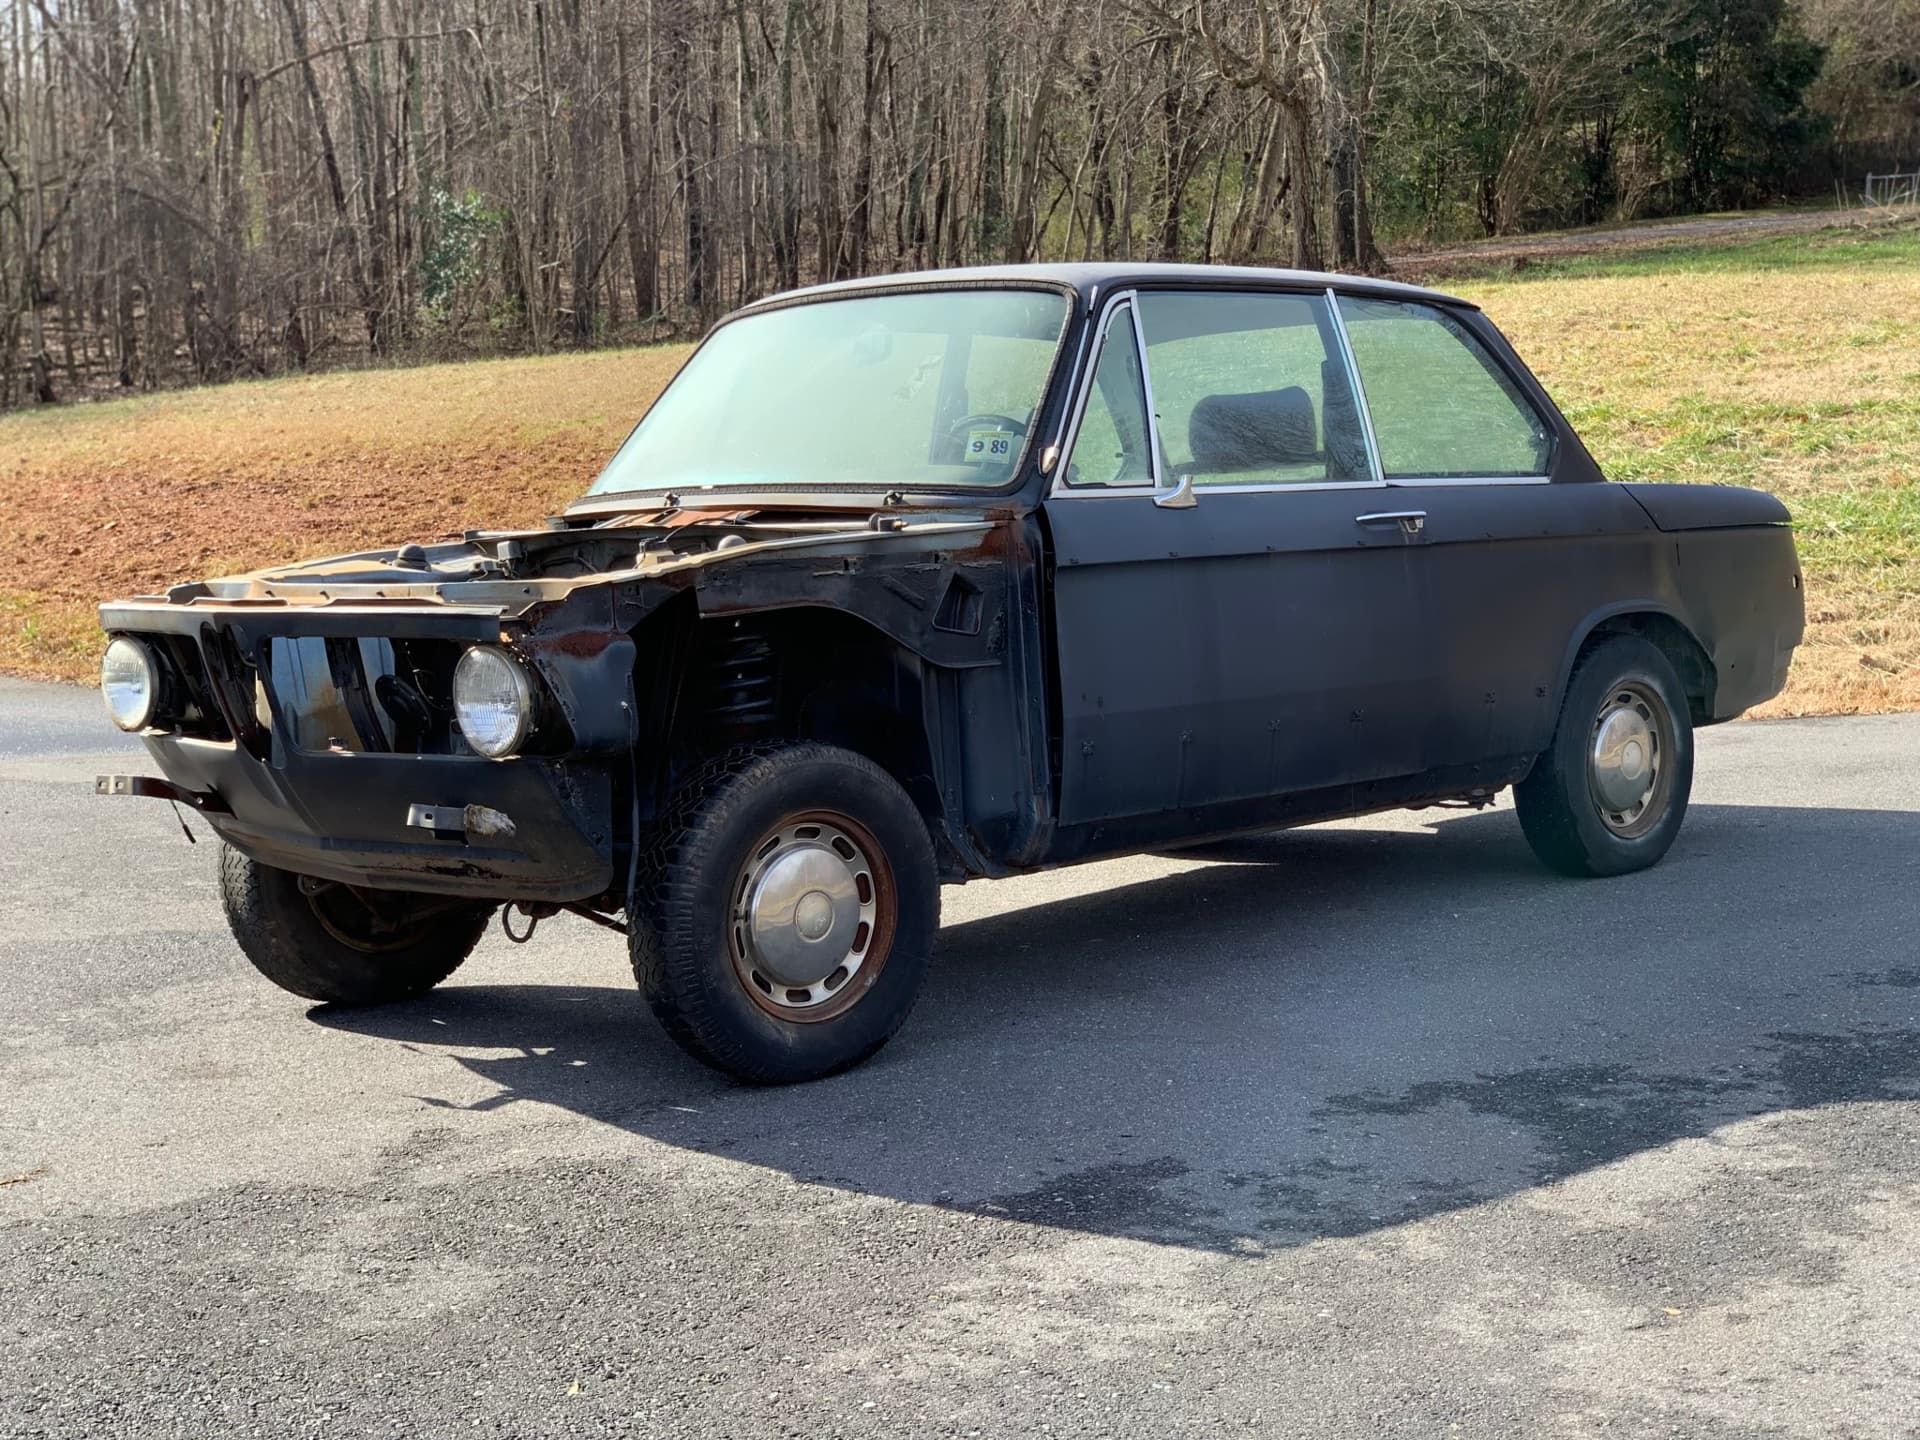 This BMW 2002 Tii, Ah, Needs Some Work